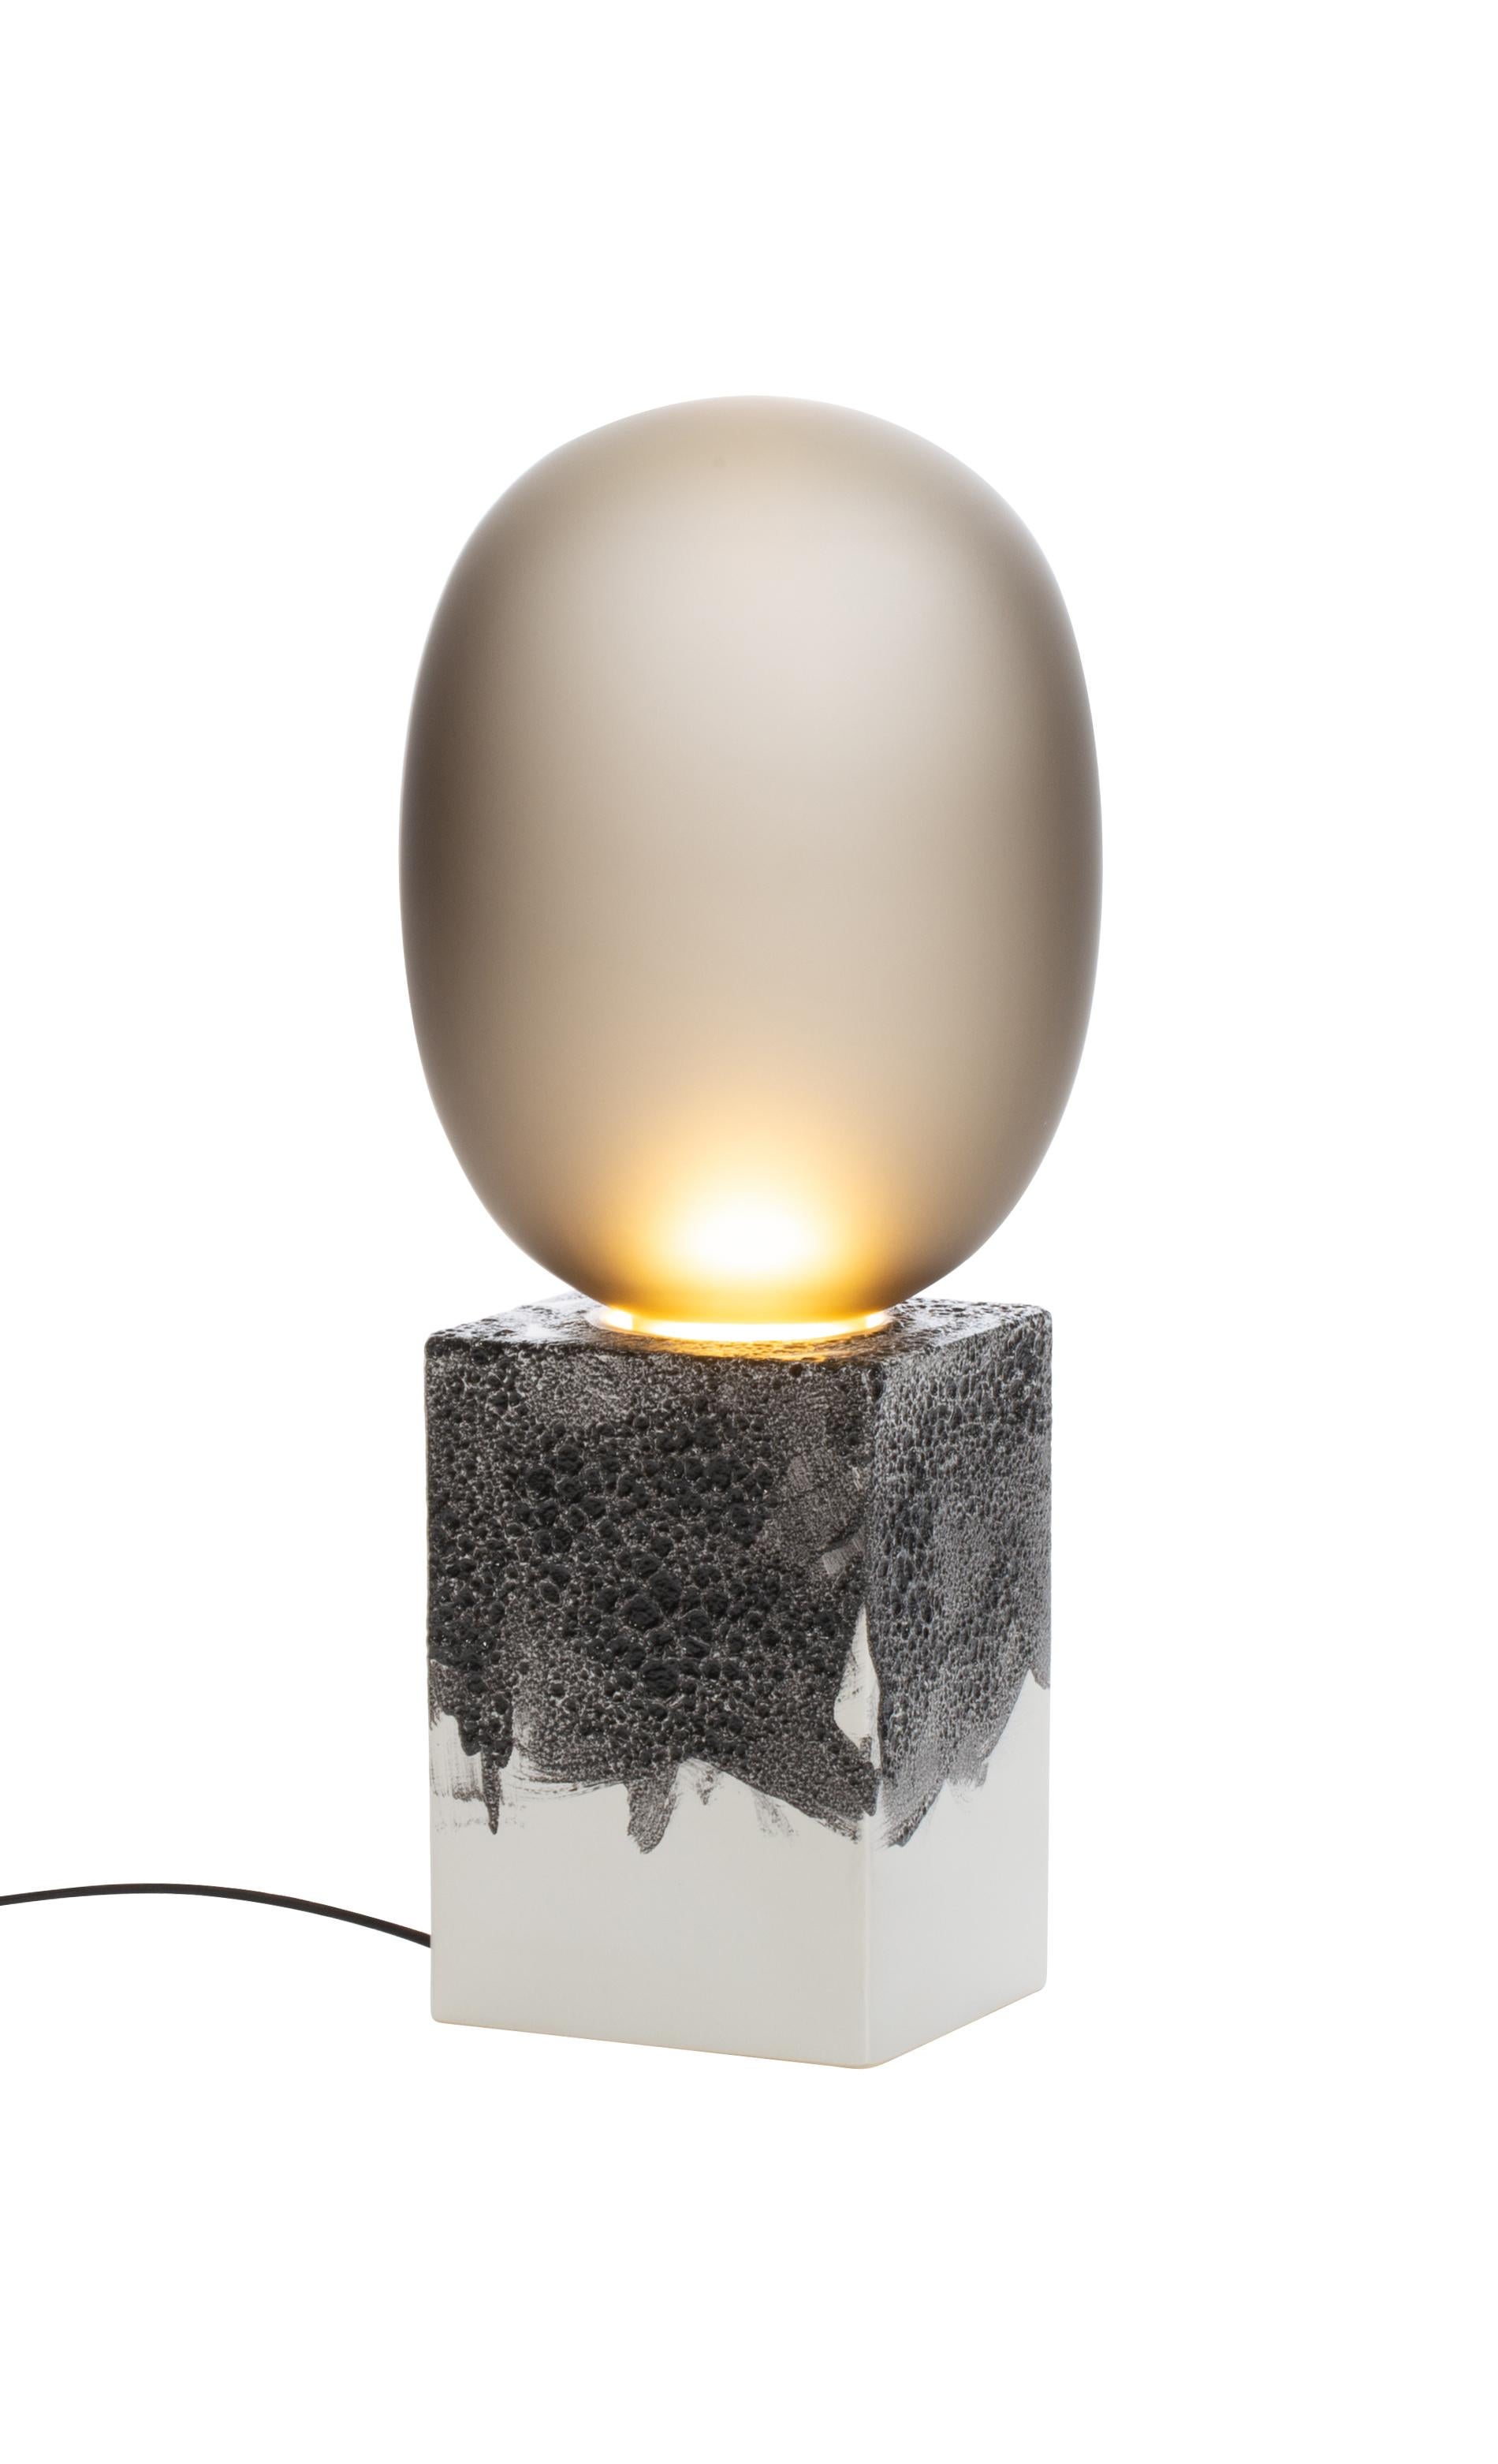 Magma One High Smoky Grey Acetato Black Table Lamp by Pulpo 2